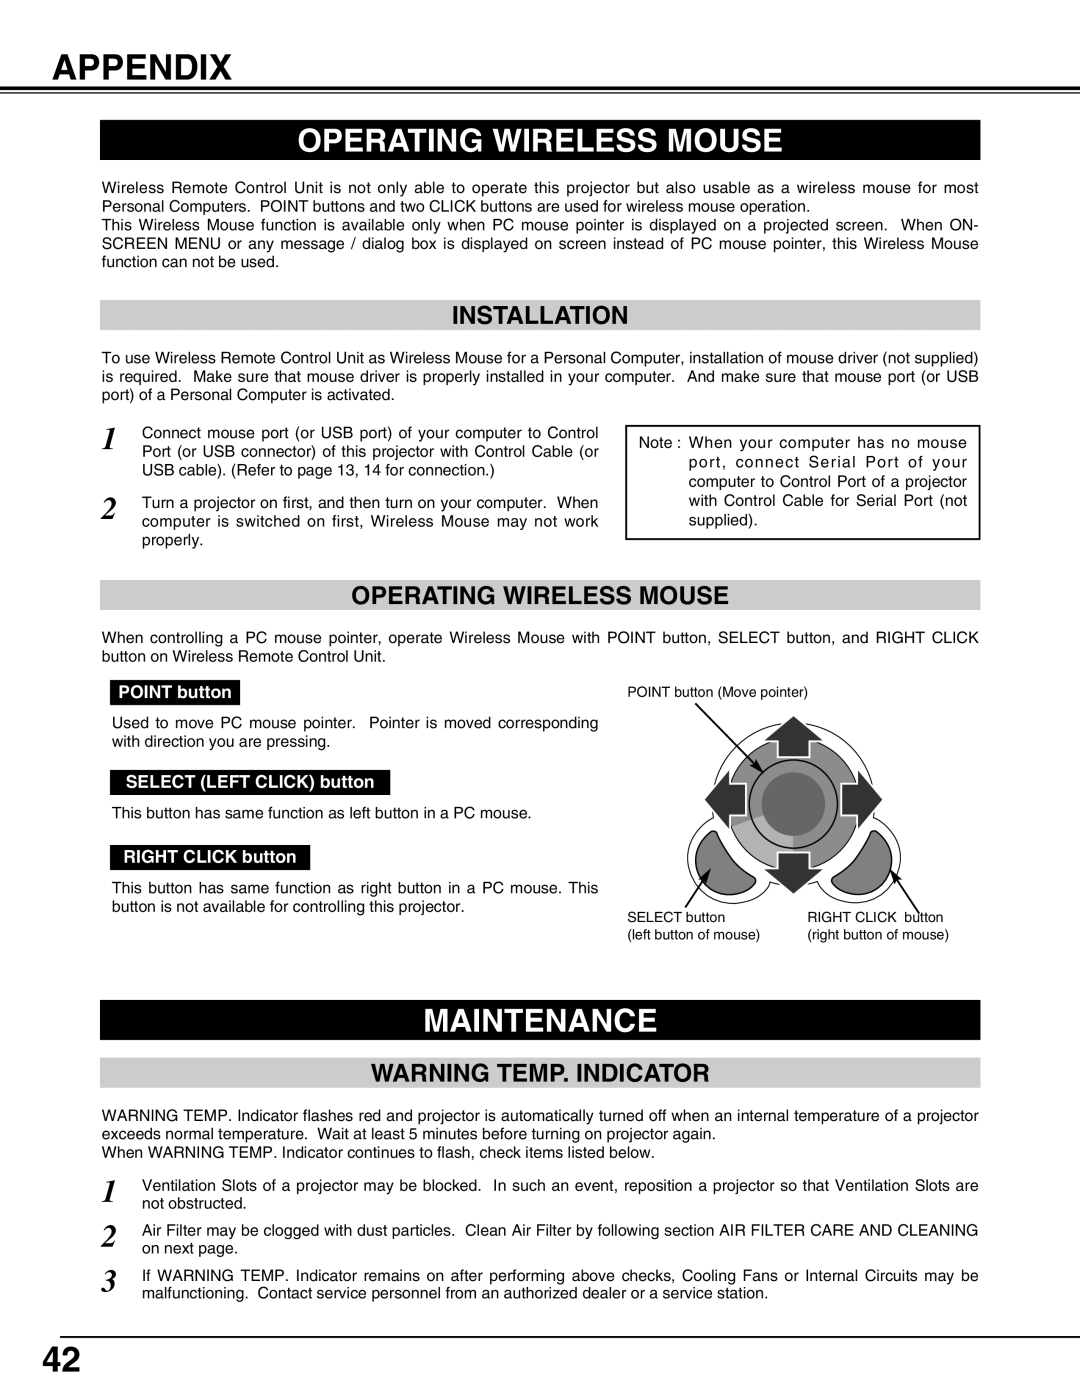 Christie Digital Systems 38-MX2001-01 user manual Appendix, Operating Wireless Mouse, Maintenance, Installation 